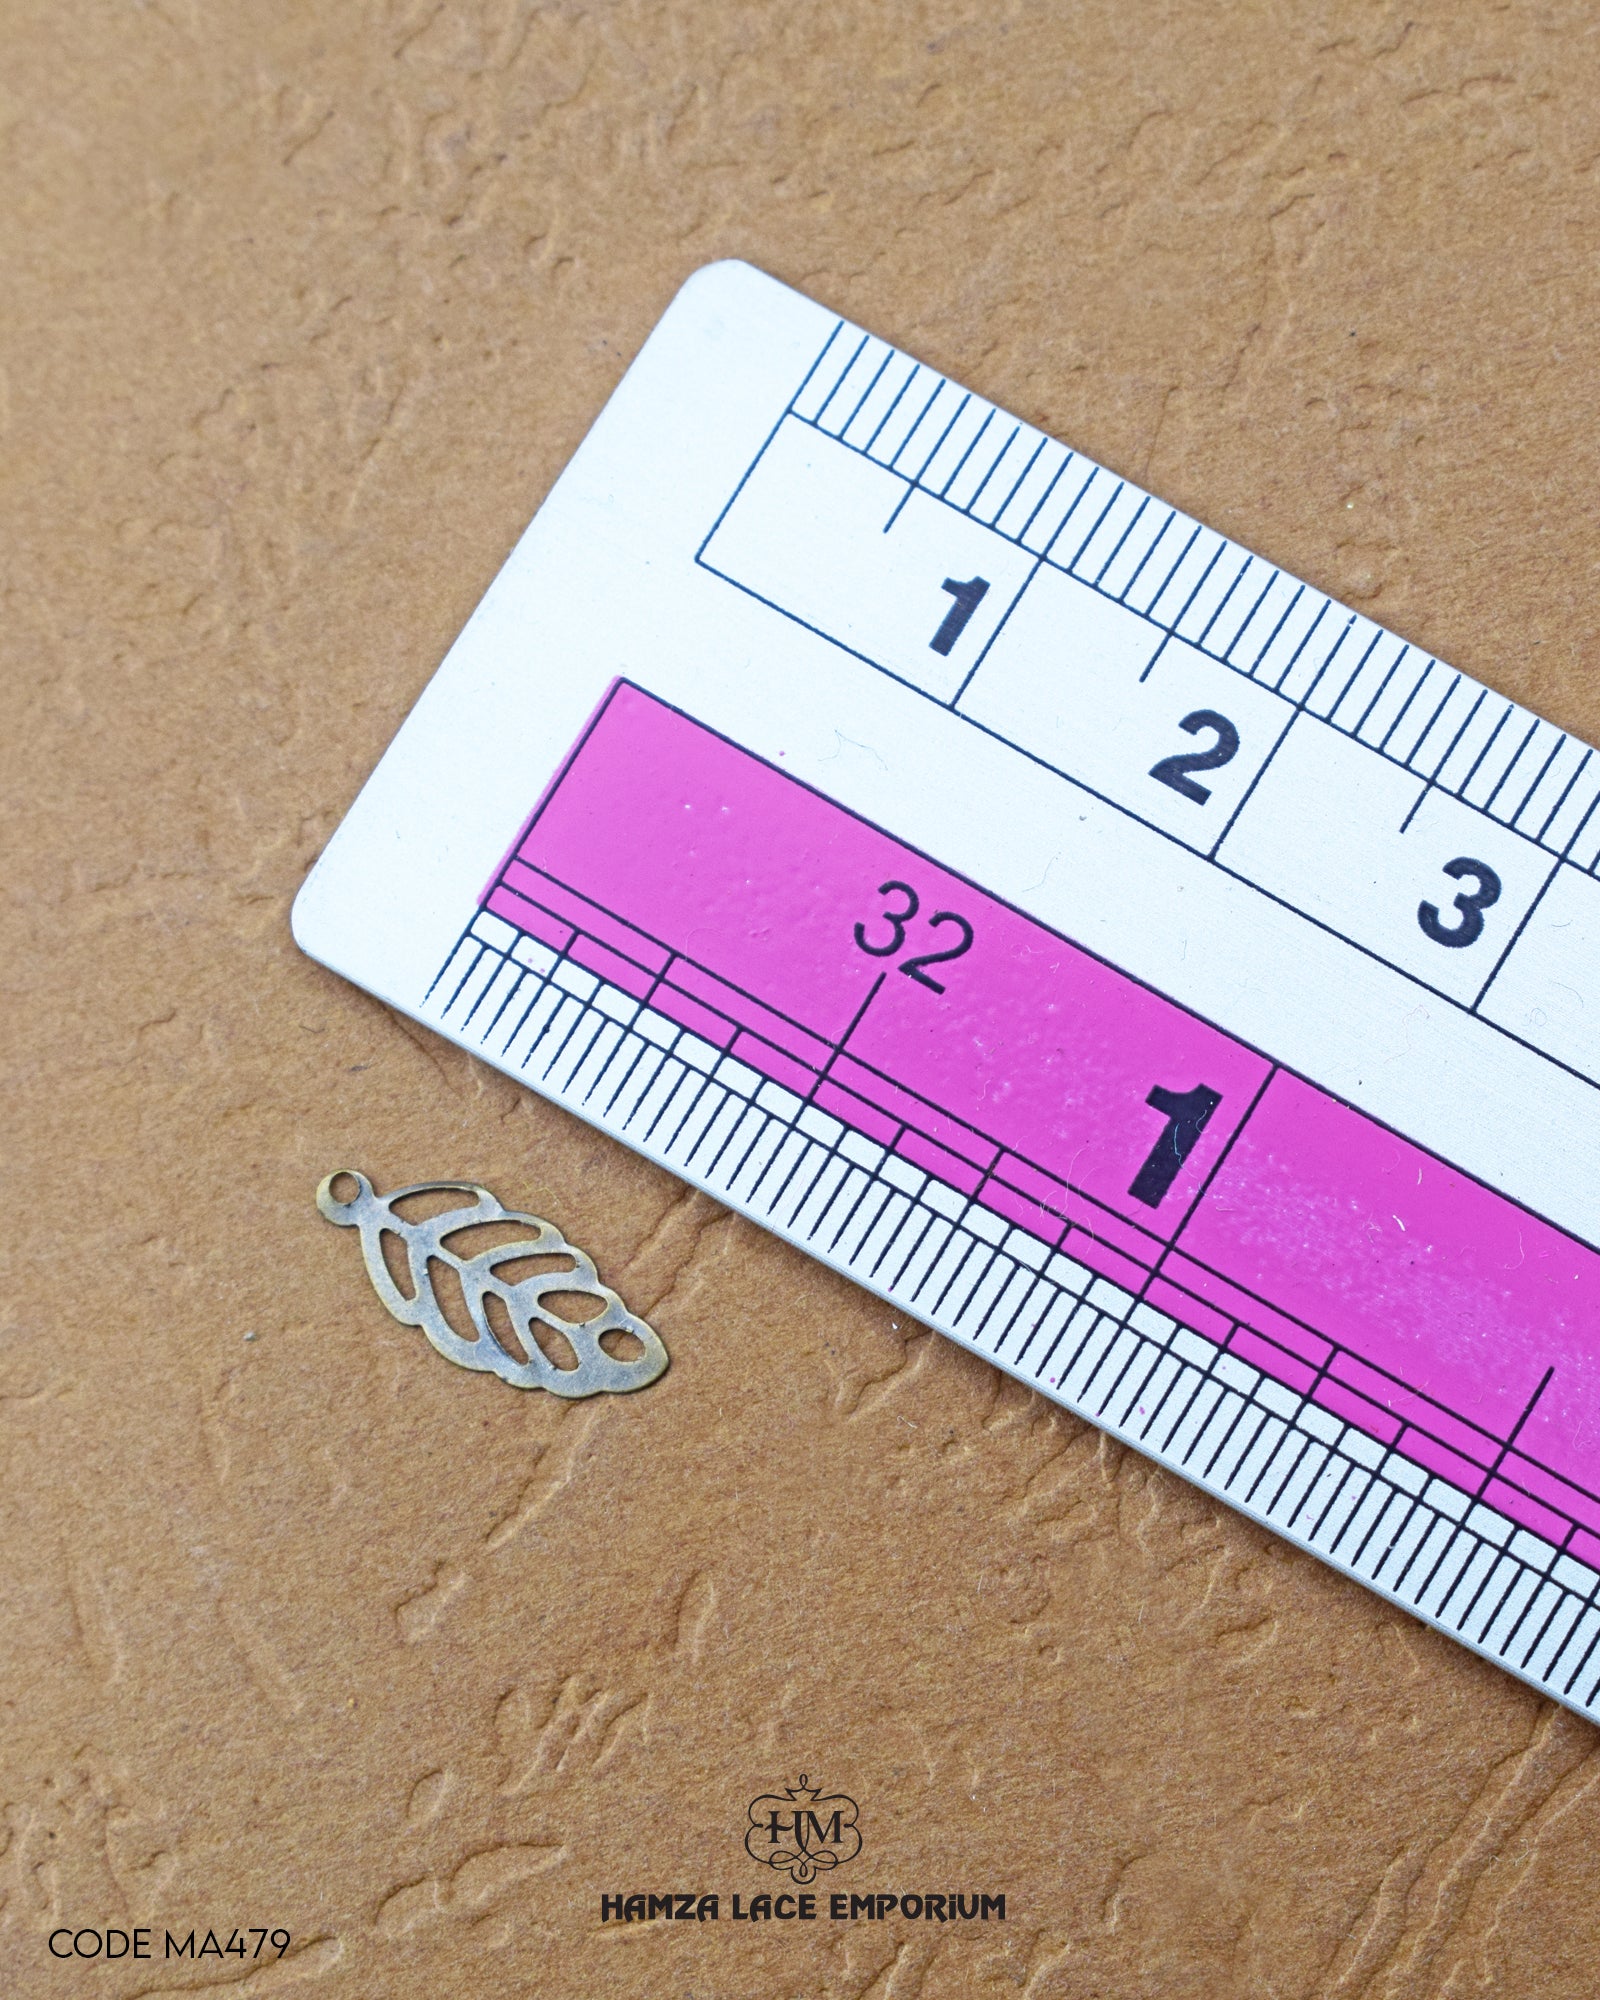 The size of the Beautifully designed 'Leaf Design Accessory MA479' is measured by using a ruler